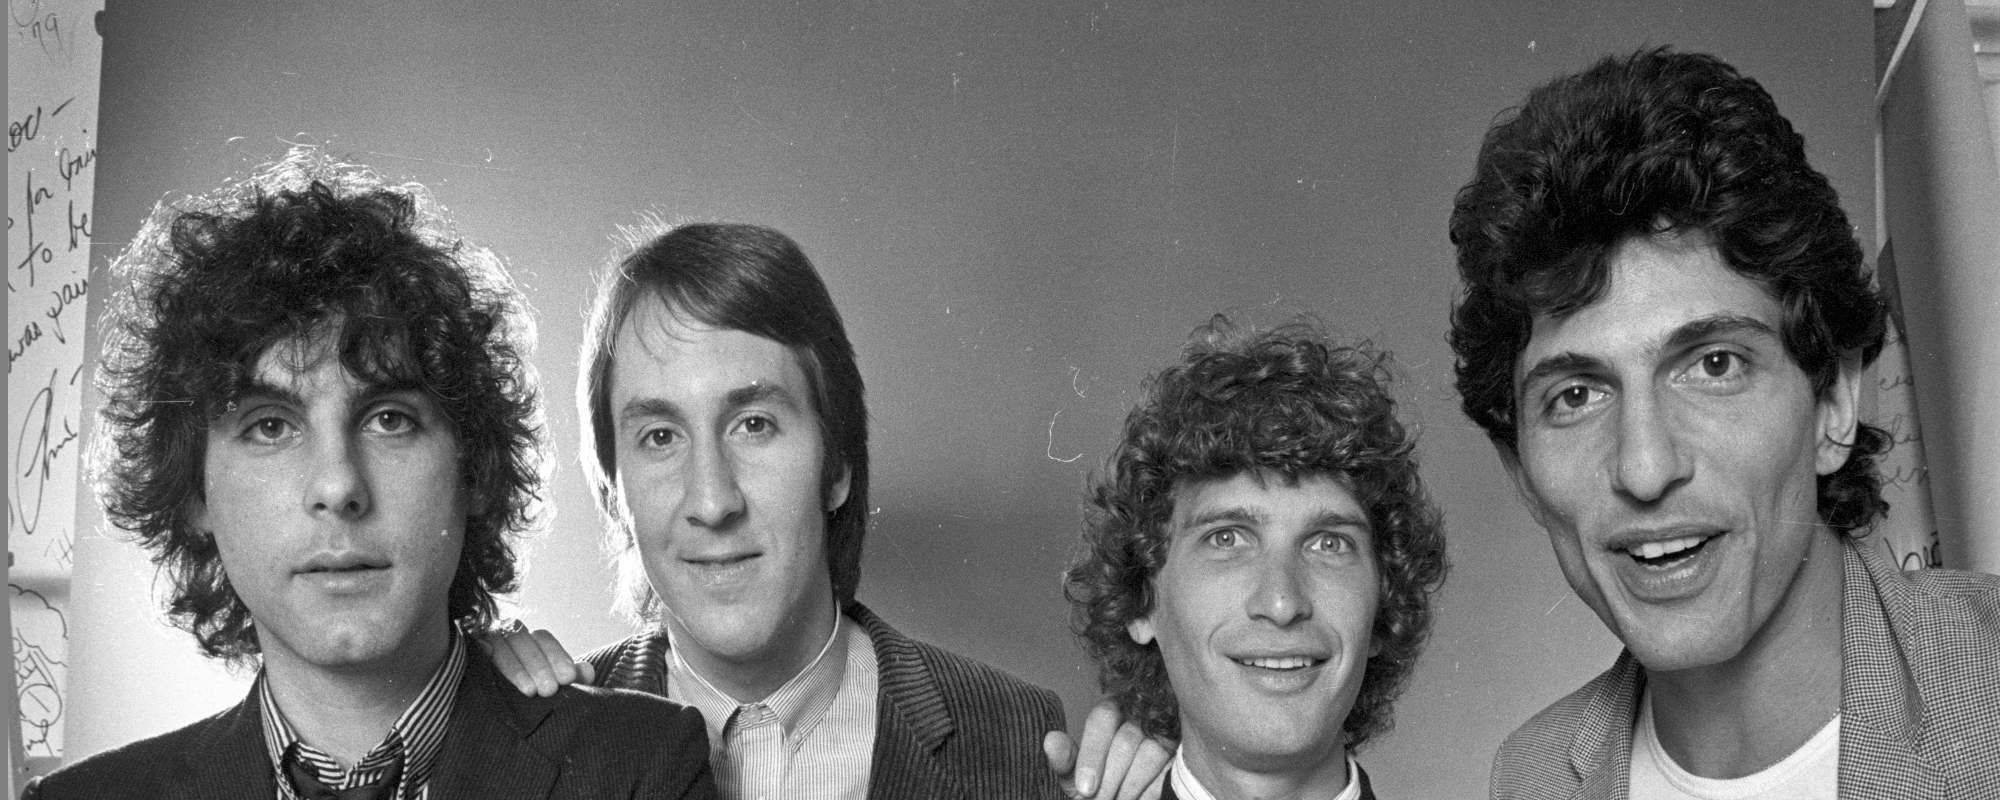 The Scandalous Meaning Behind “My Sharona” by The Knack